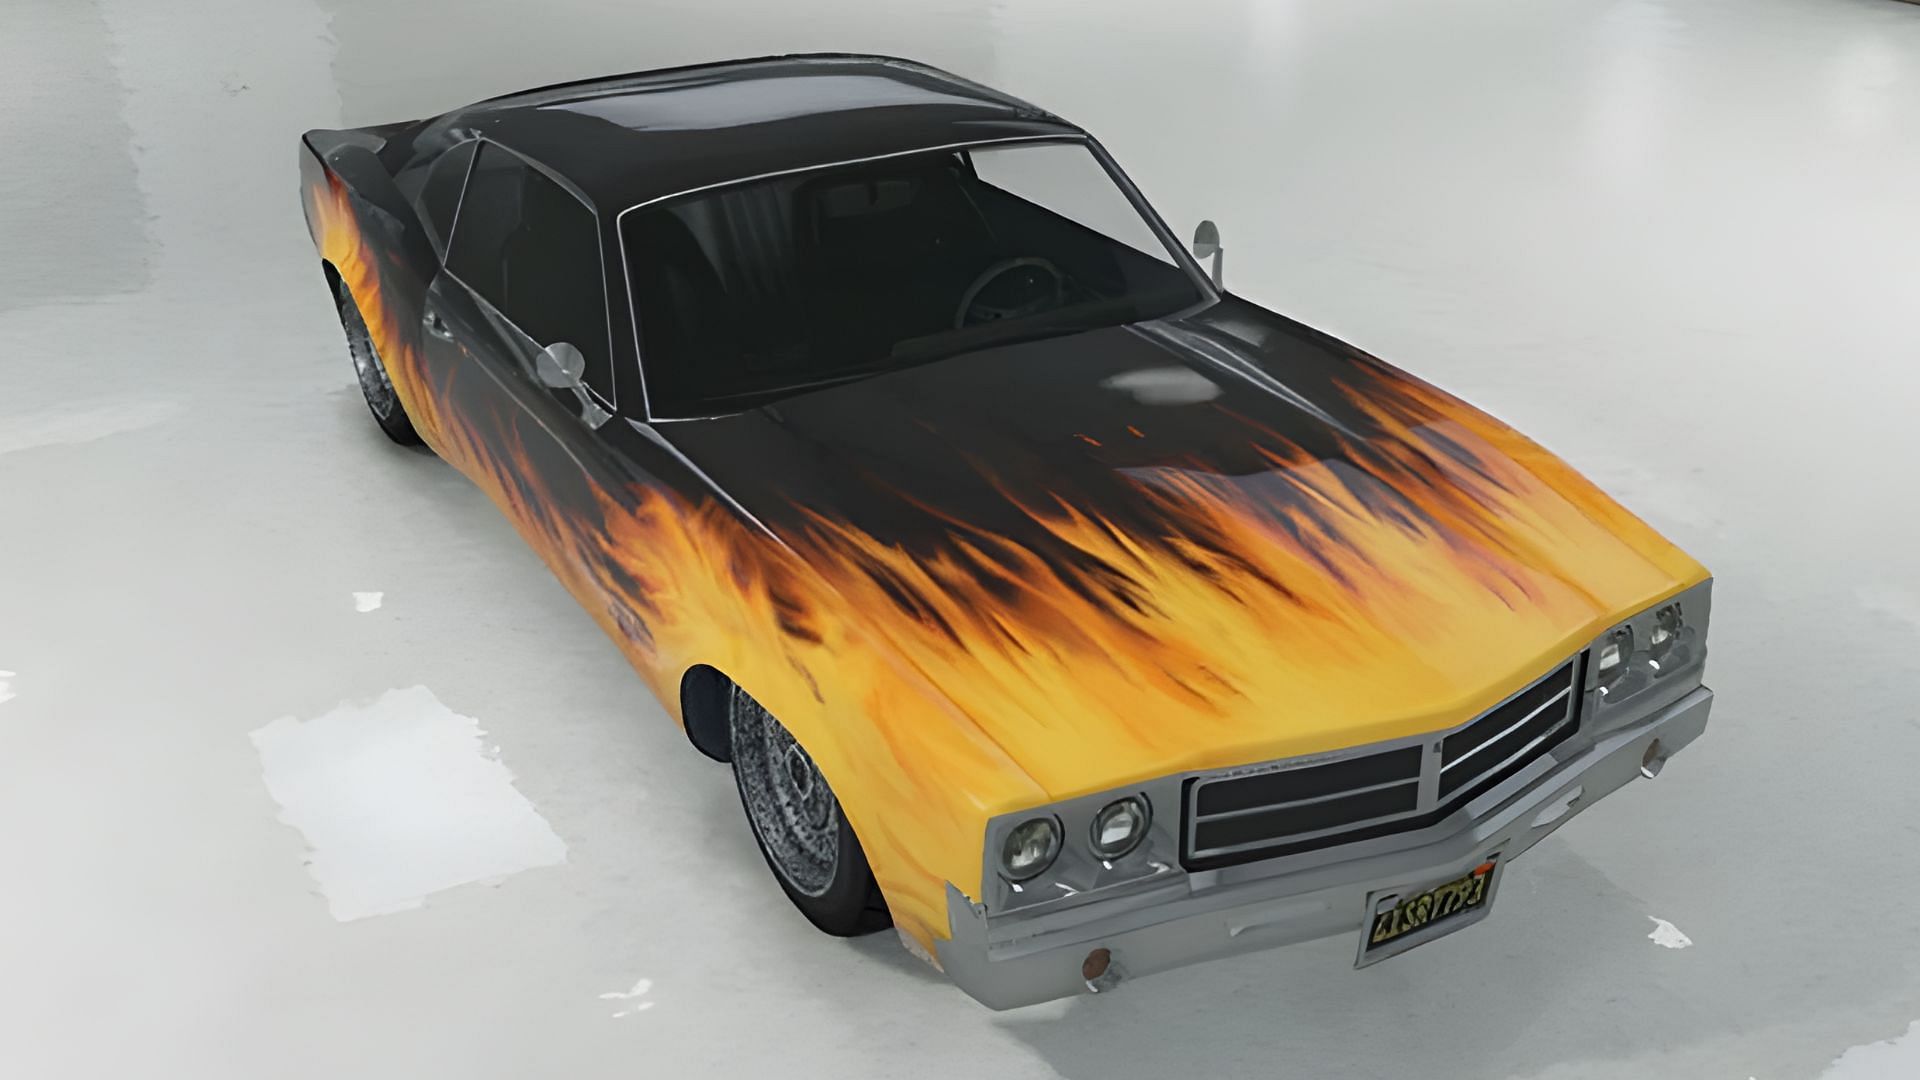 The Sabre Turbo Custom is an example of a vehicle that does have this feature